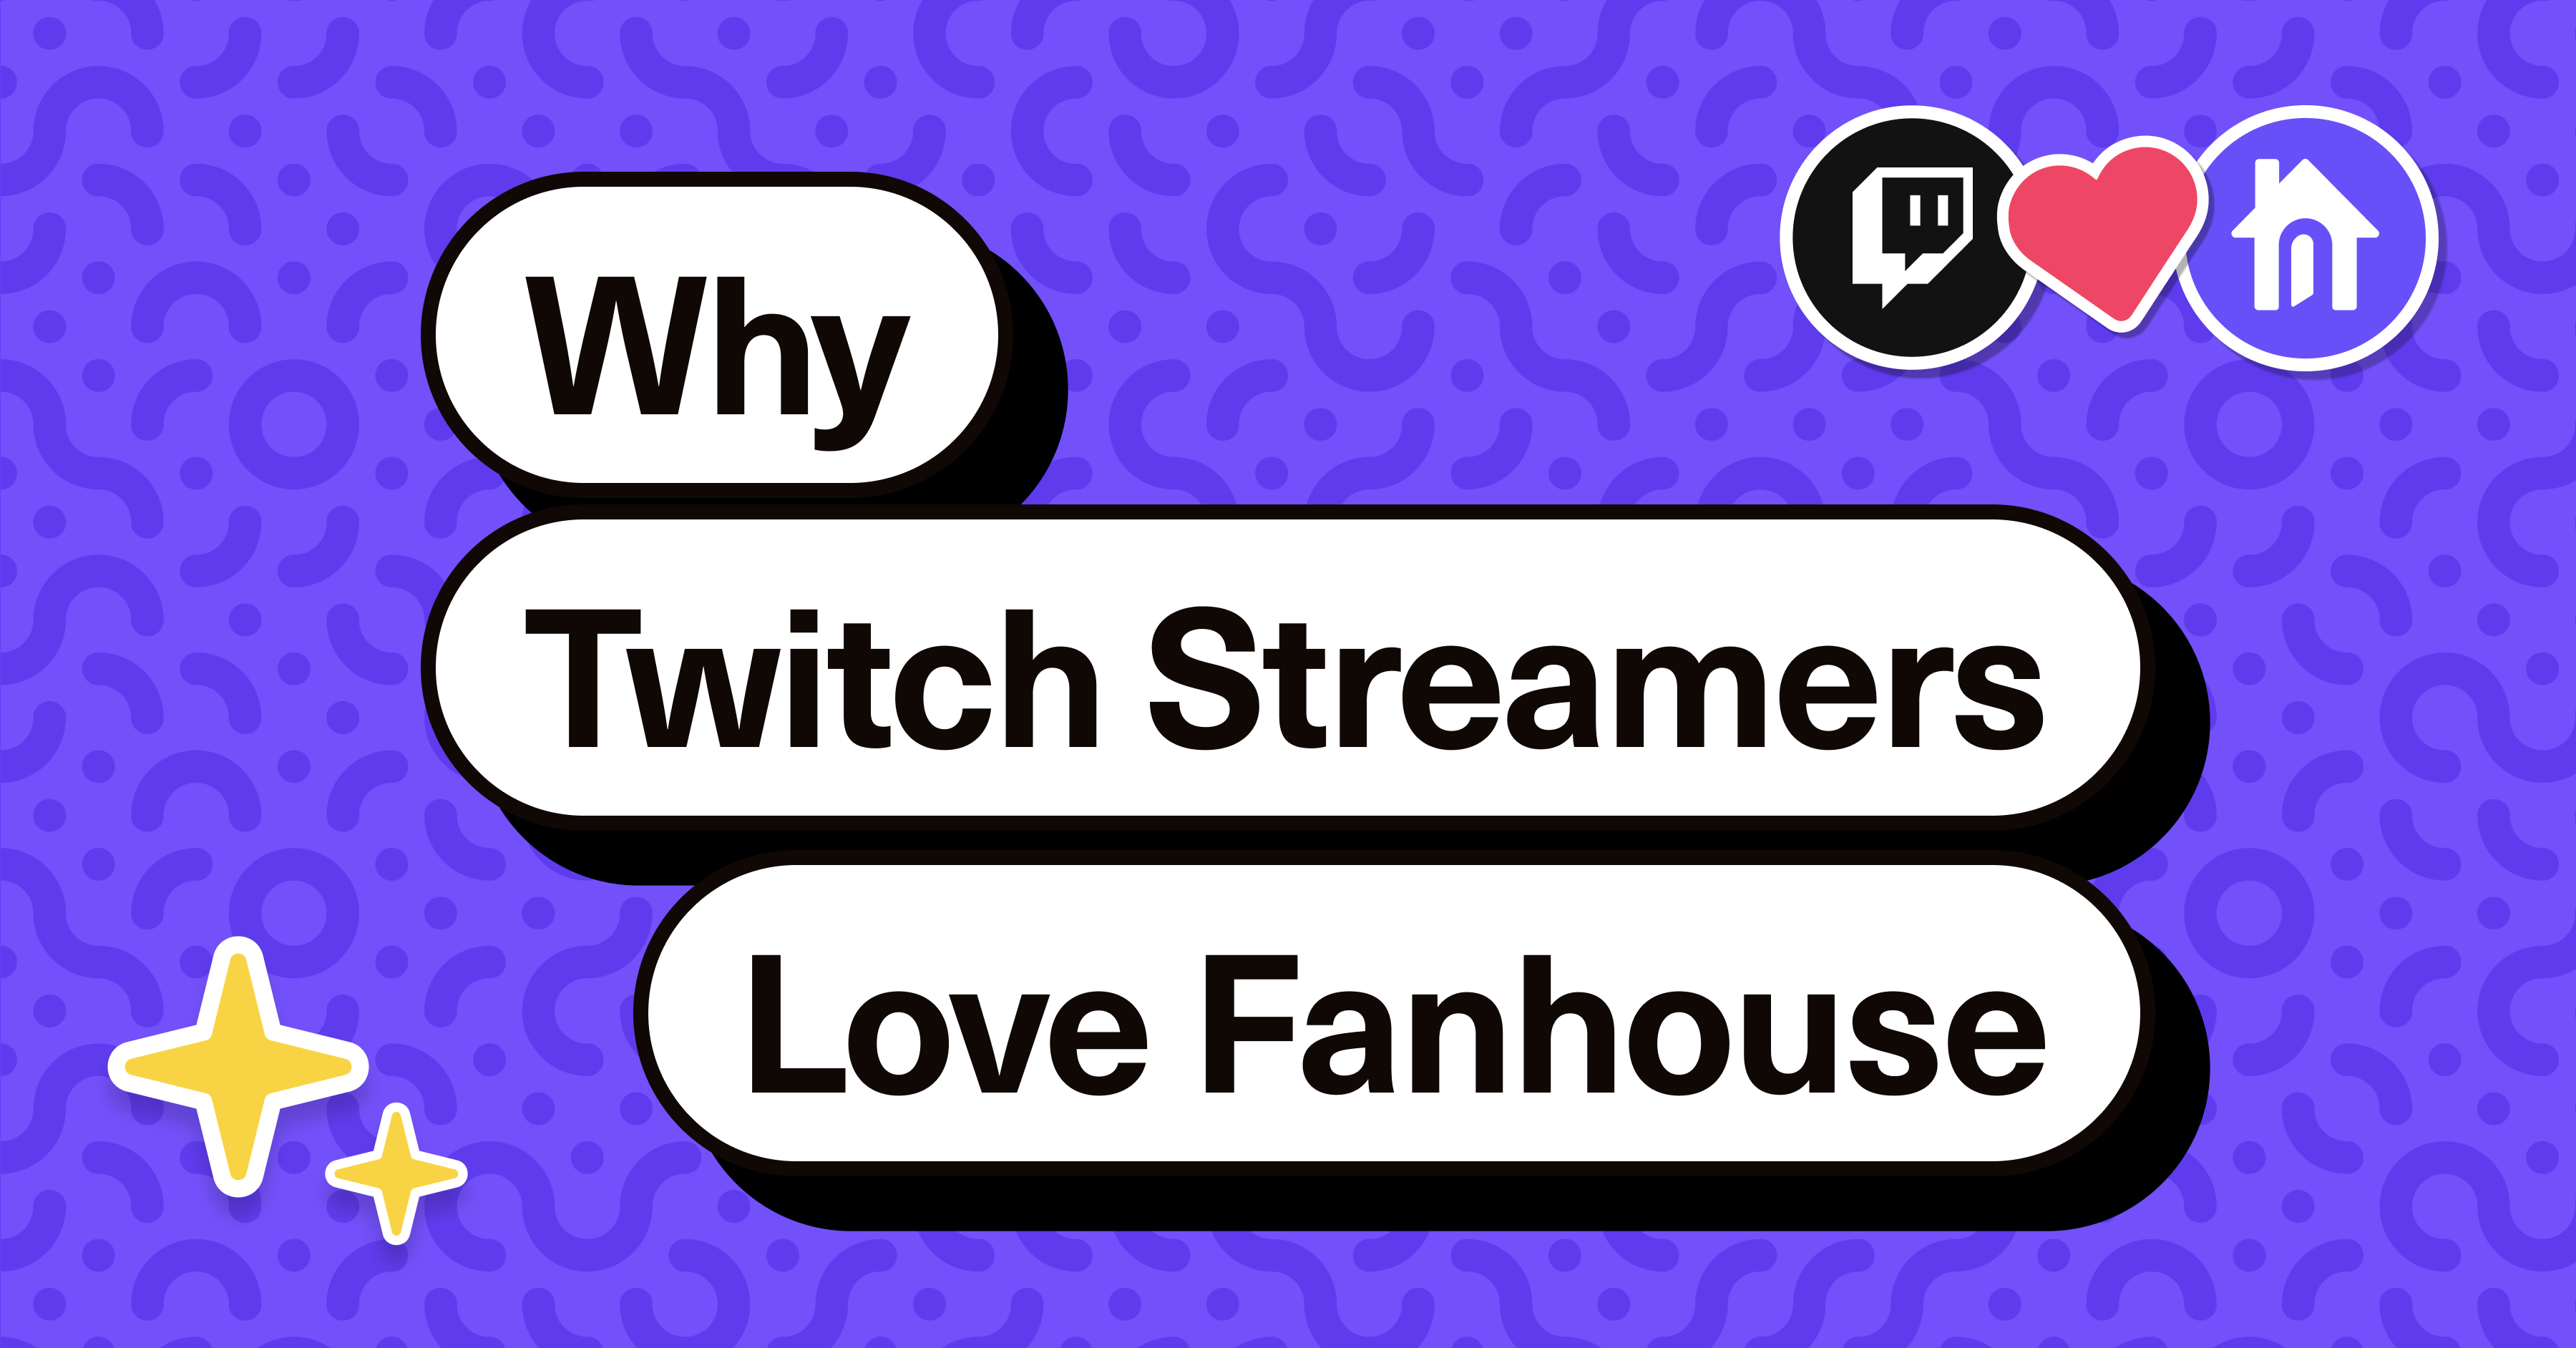 Why Twitch Streamers Love Fanhouse